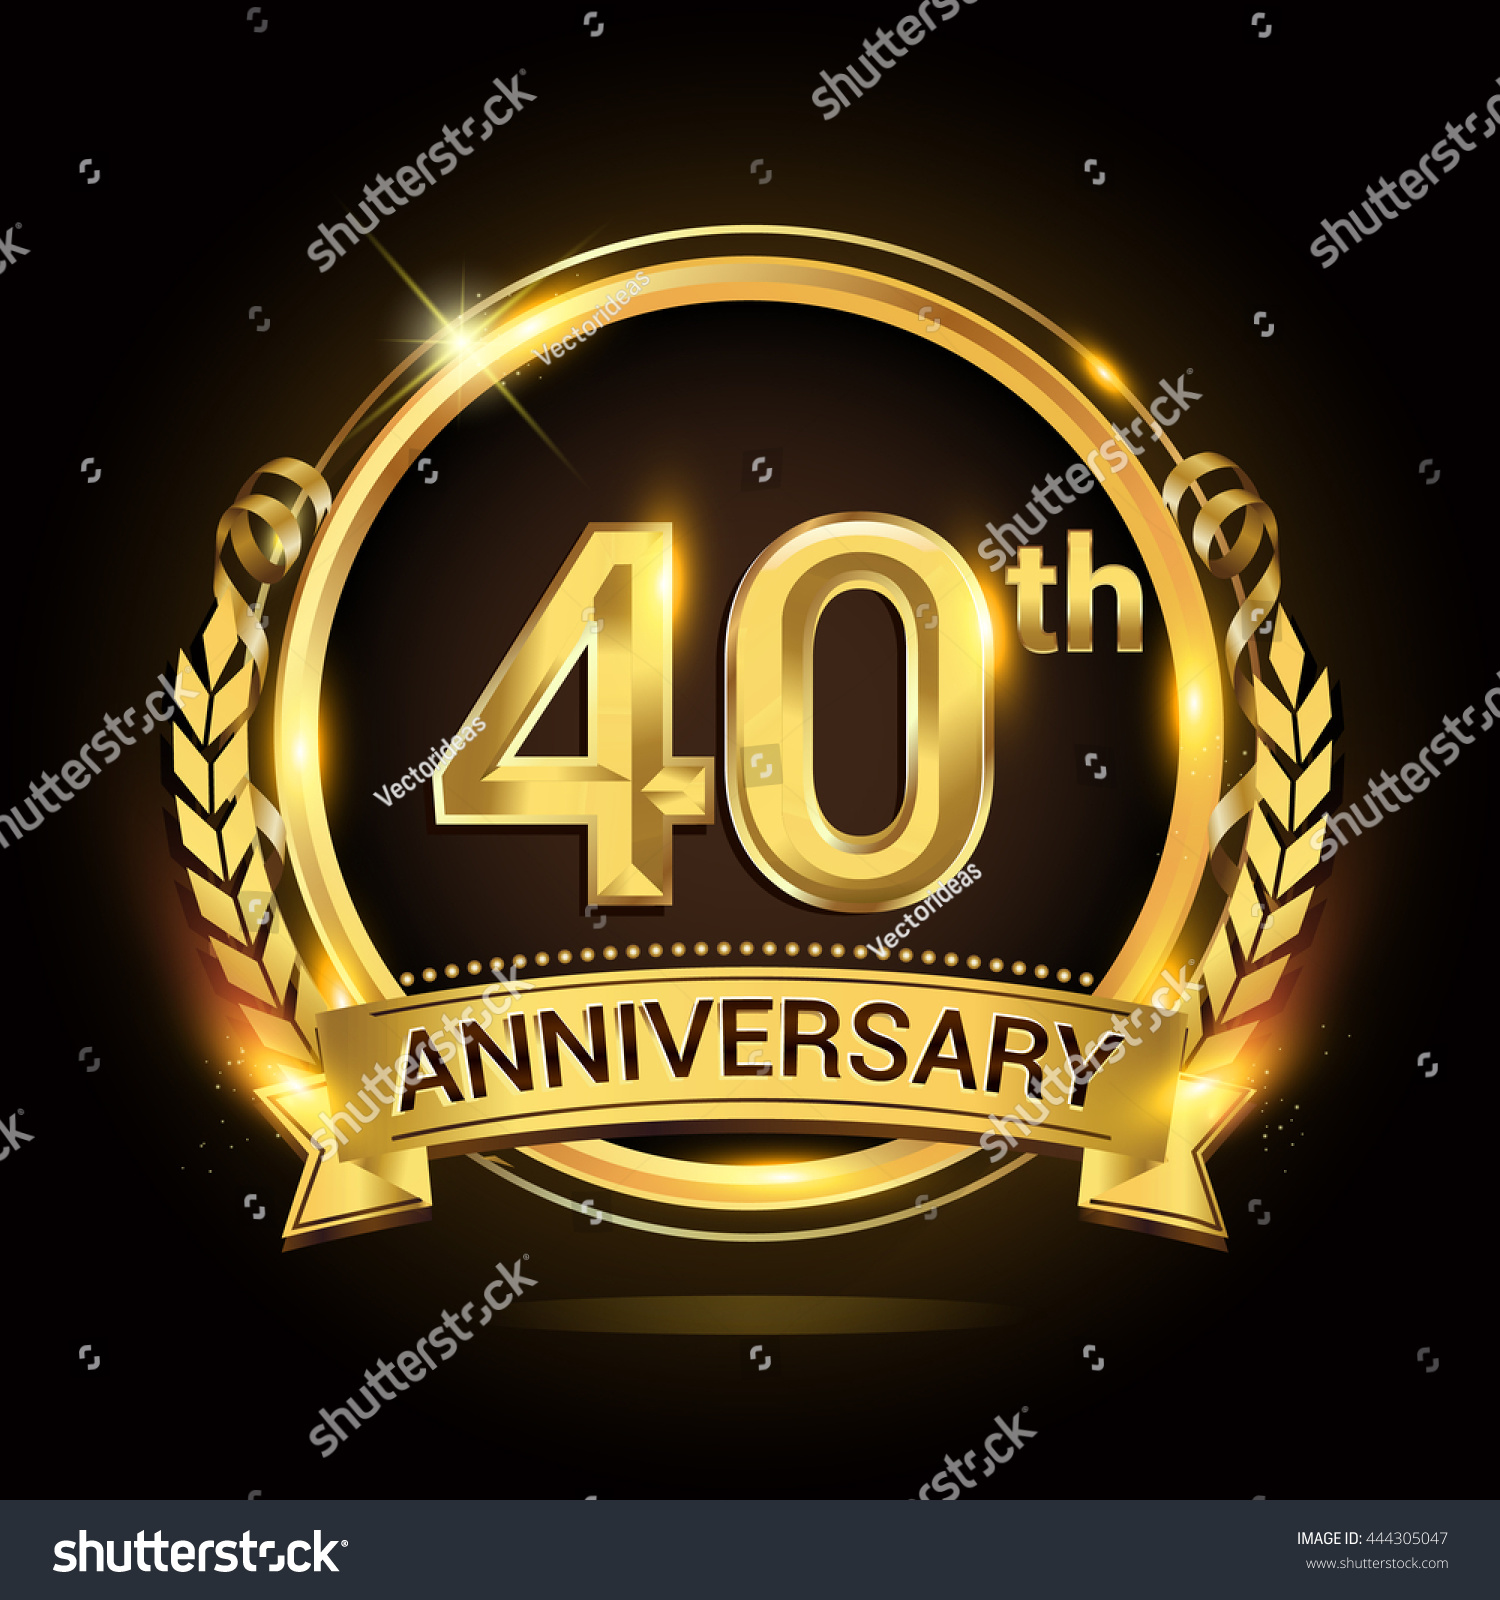 40th Golden Anniversary Logo 40 Years Stock Vector Royalty Free 444305047